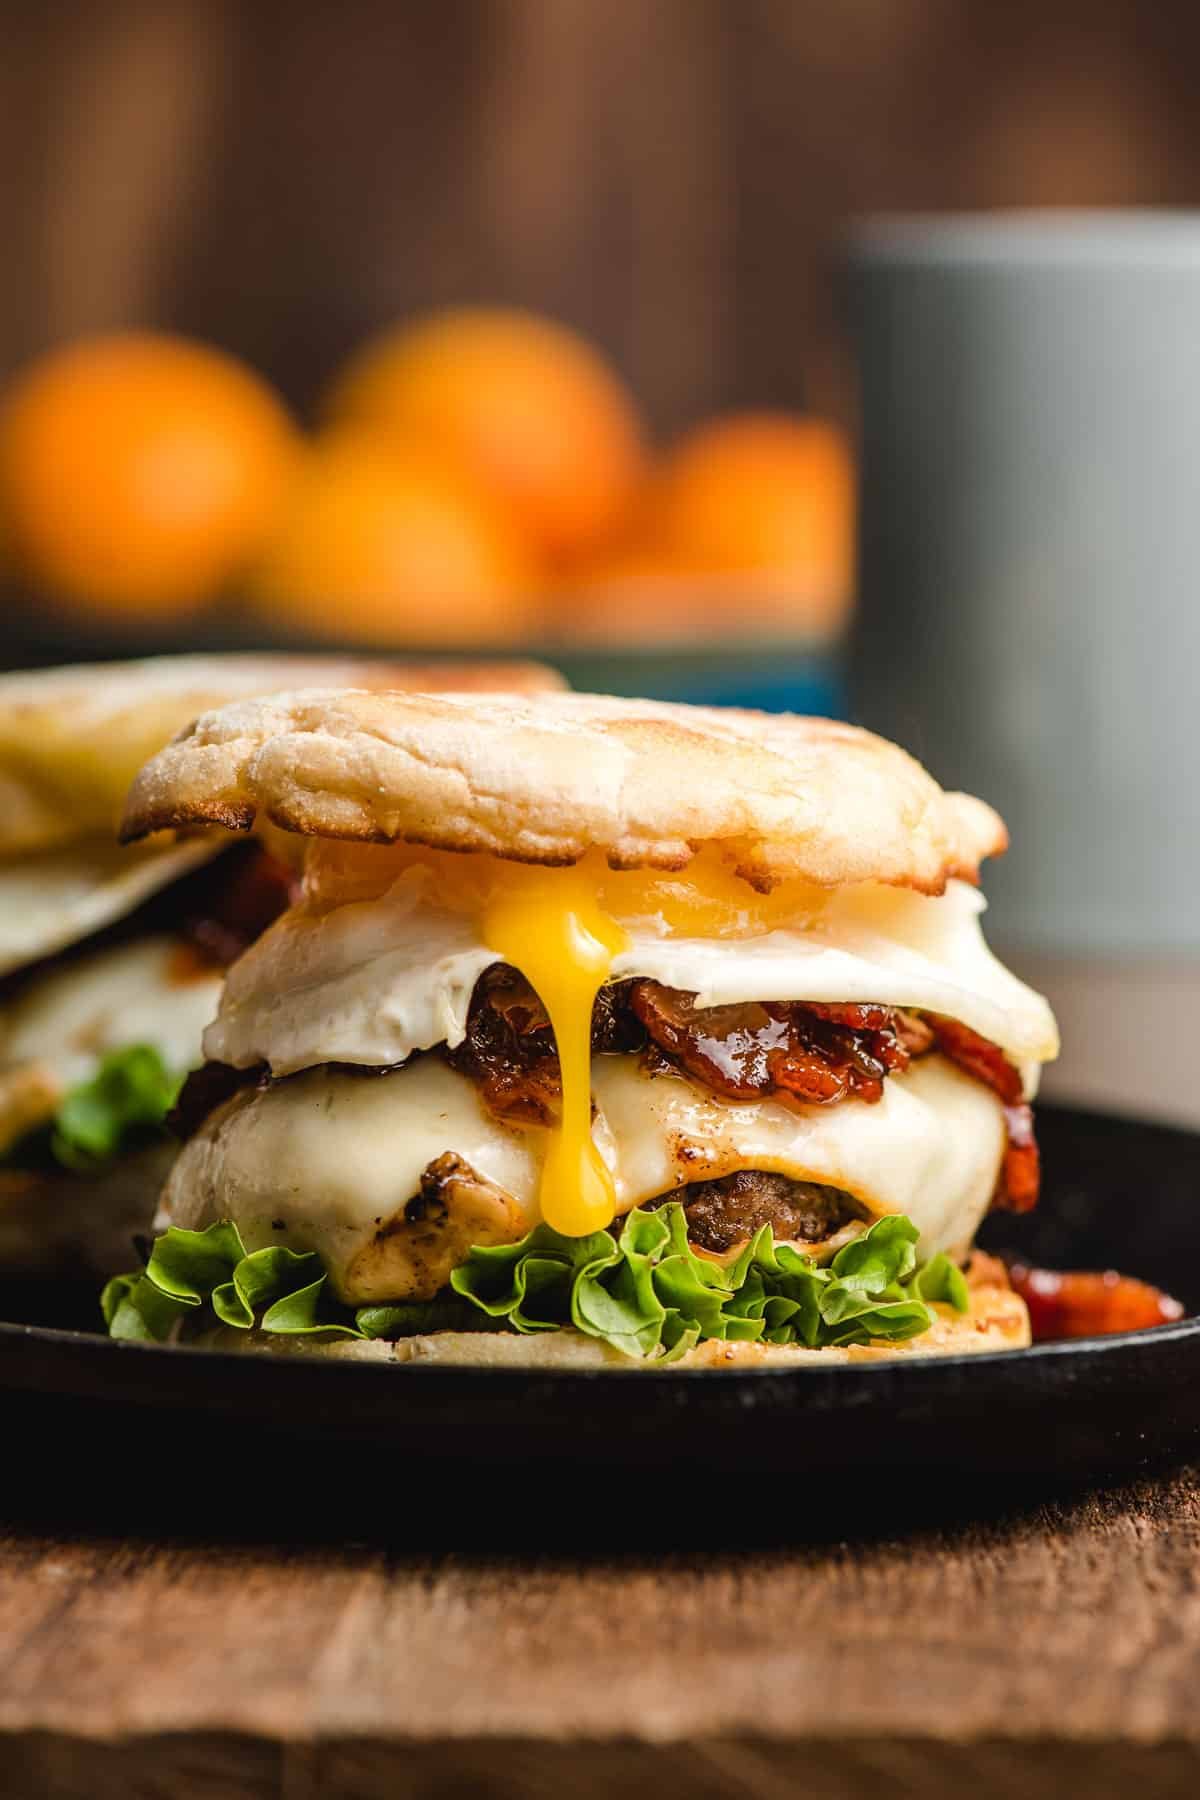 Breakfast burger featuring an English muffin, cheeseburger, salary jam, and a fried egg with the yolk spilling out the side.